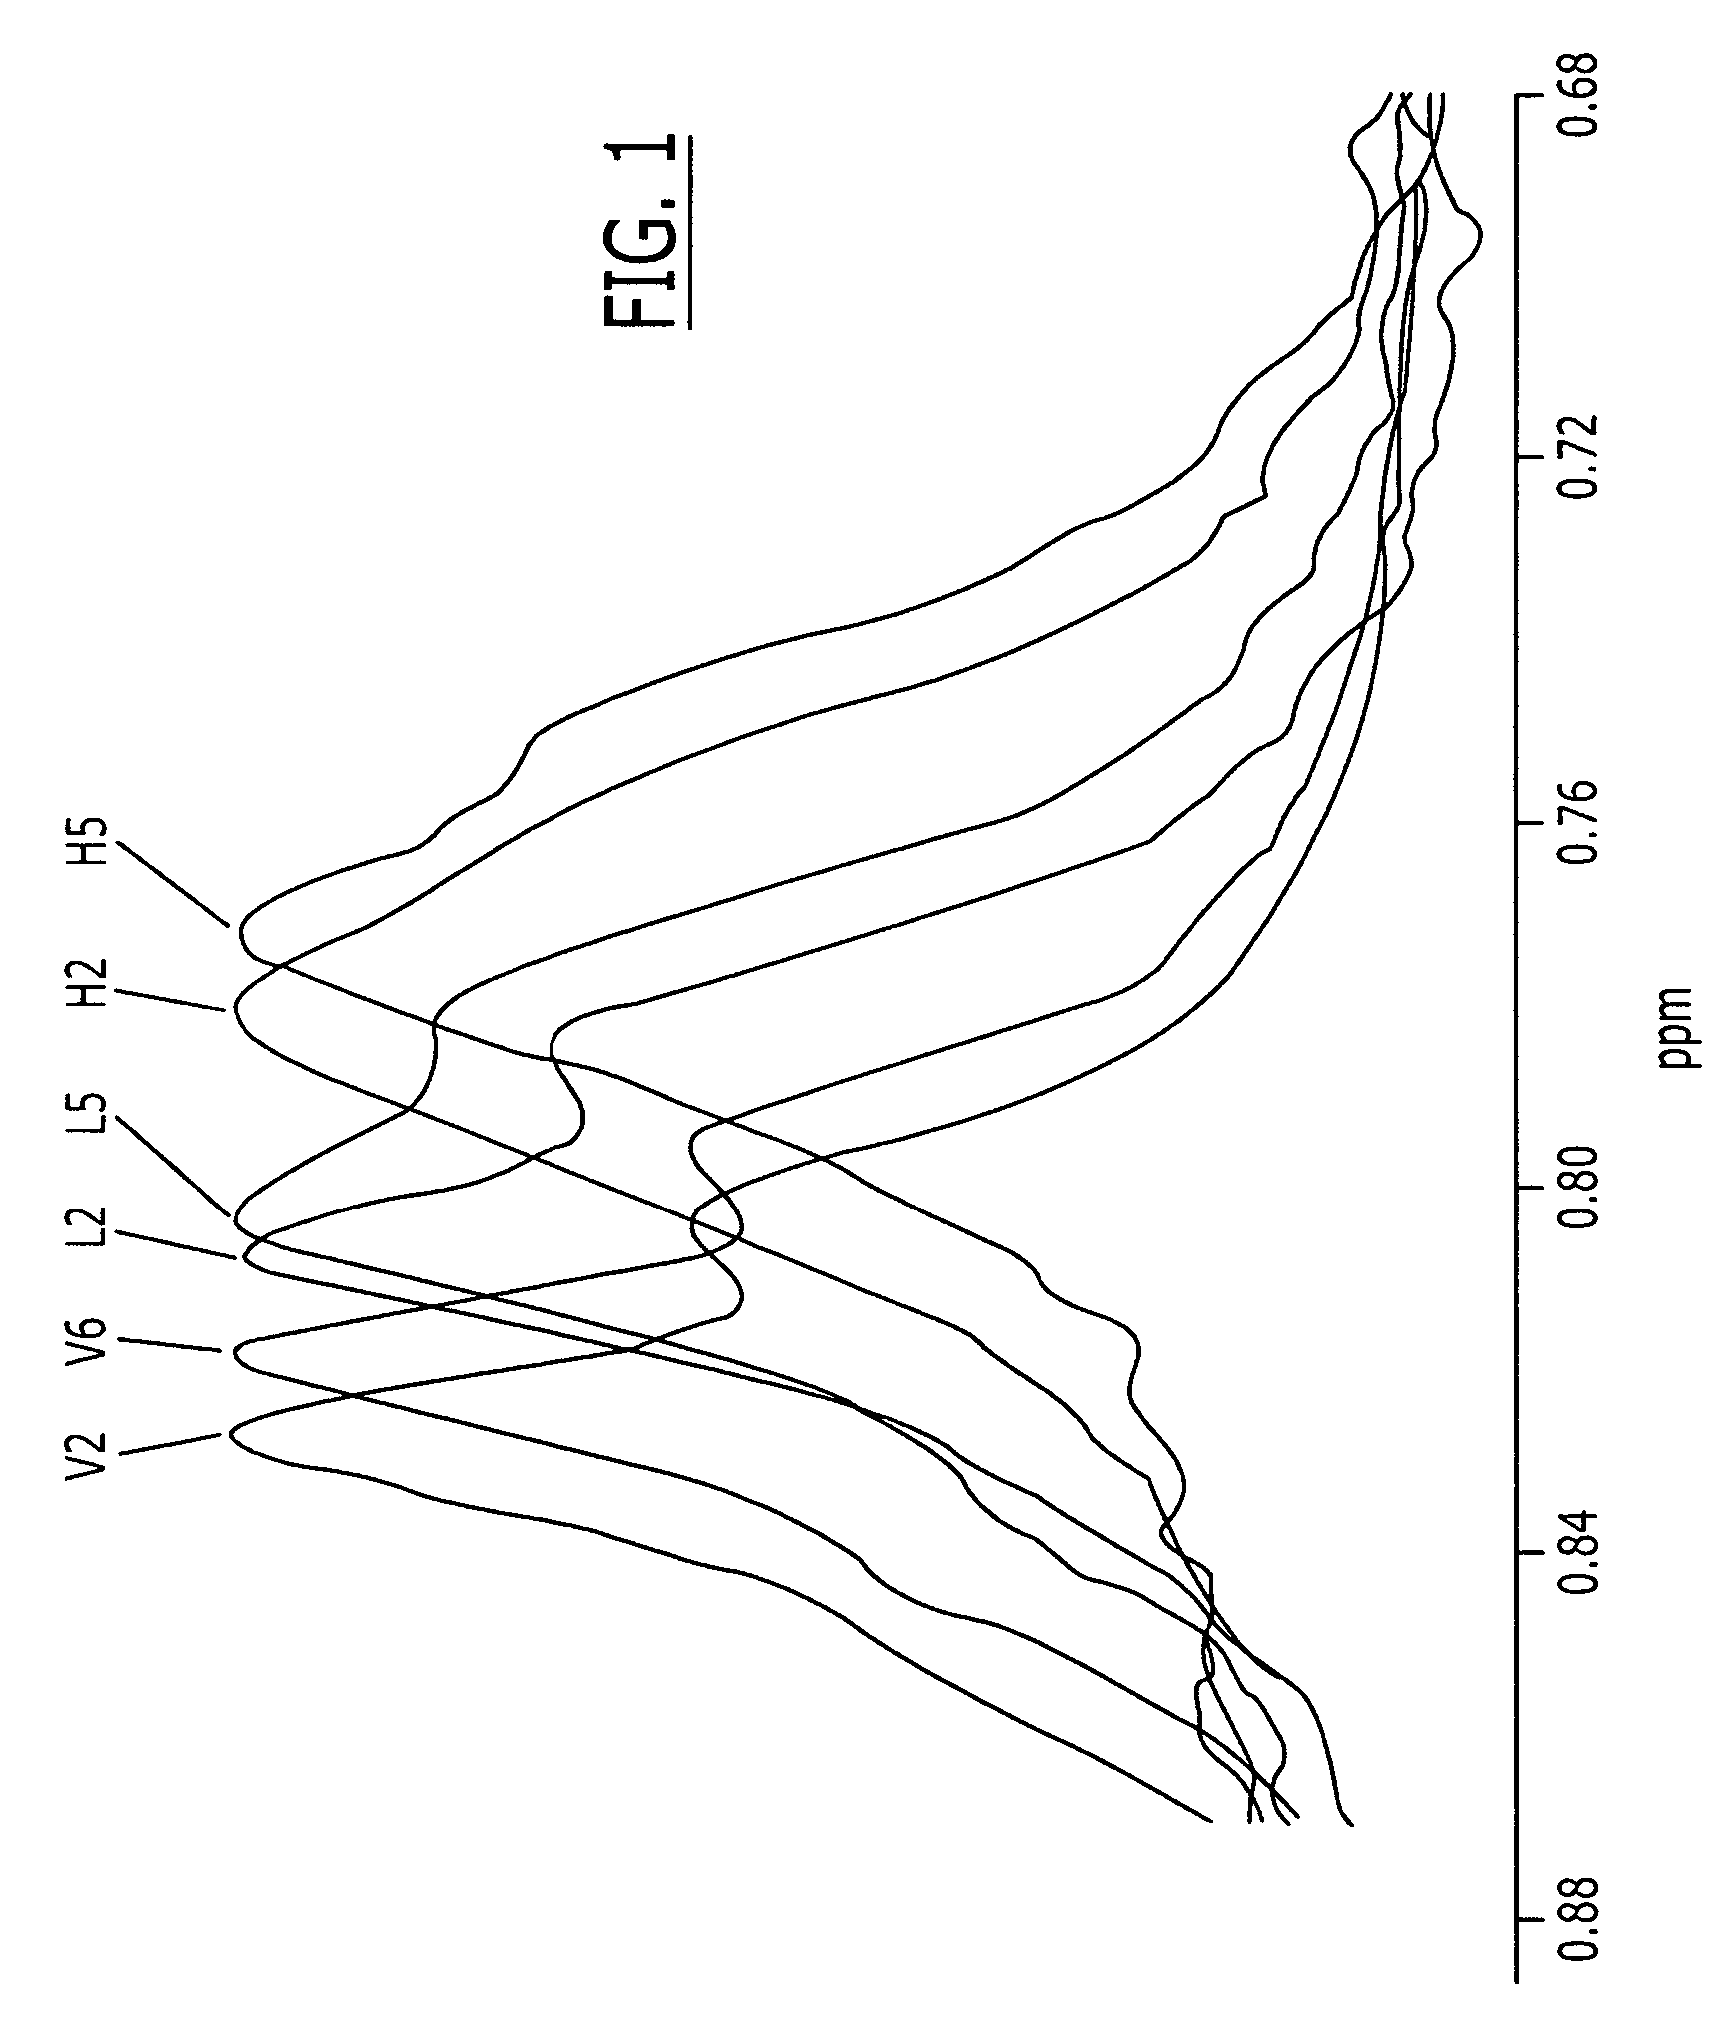 Methods, systems and computer programs for deconvolving the spectral contribution of chemical constituents with overlapping signals